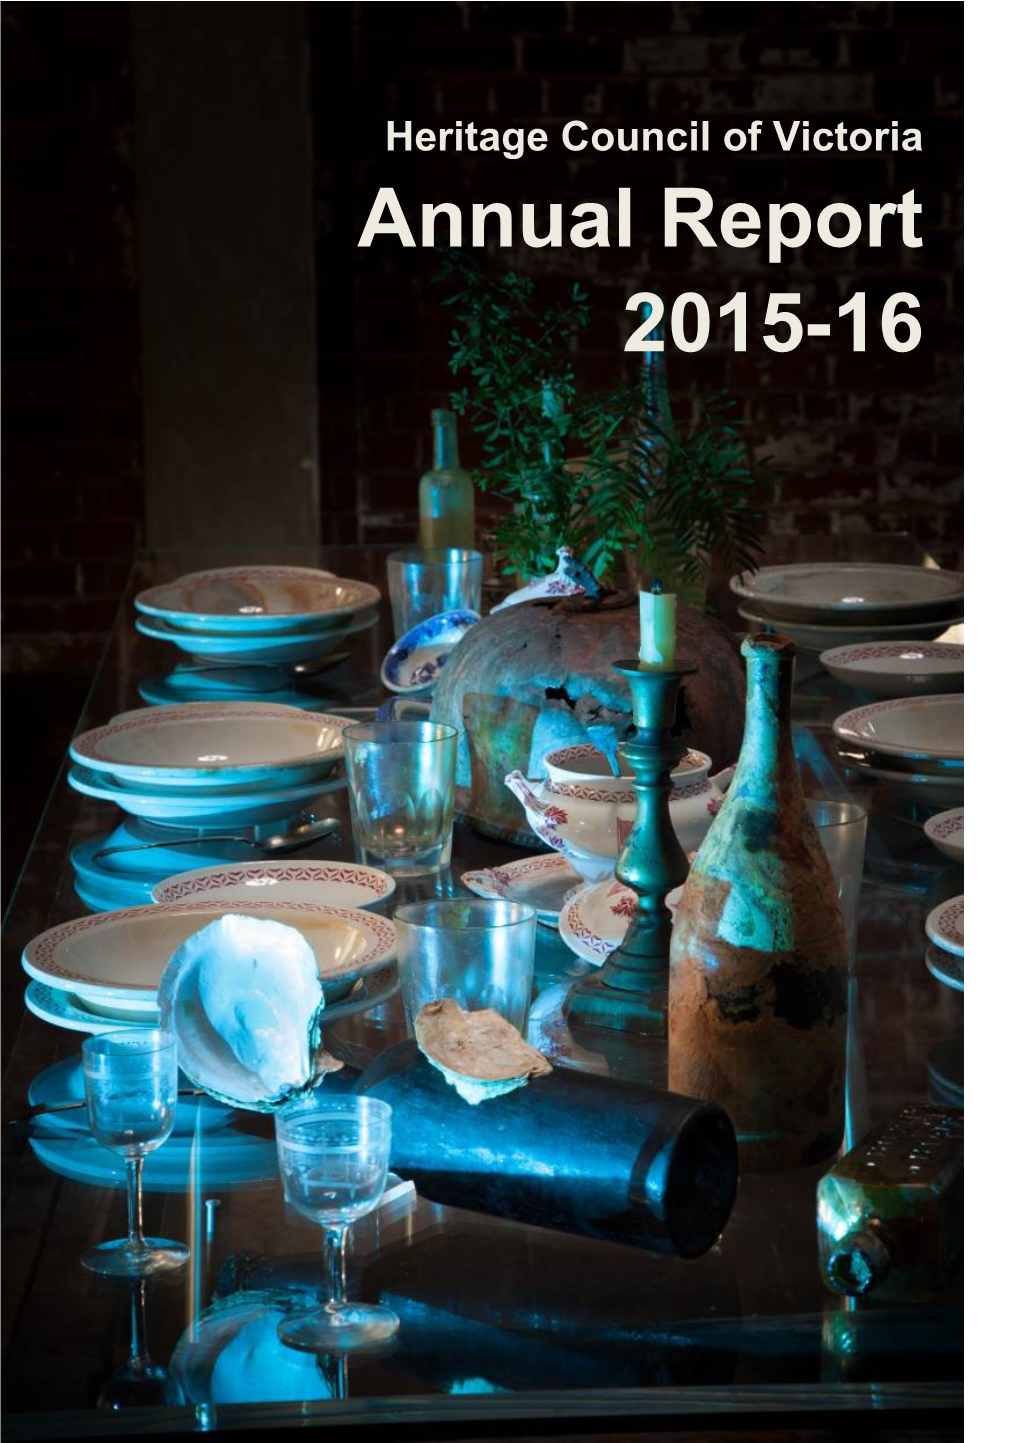 Heritage Council Annual Report 2015-16